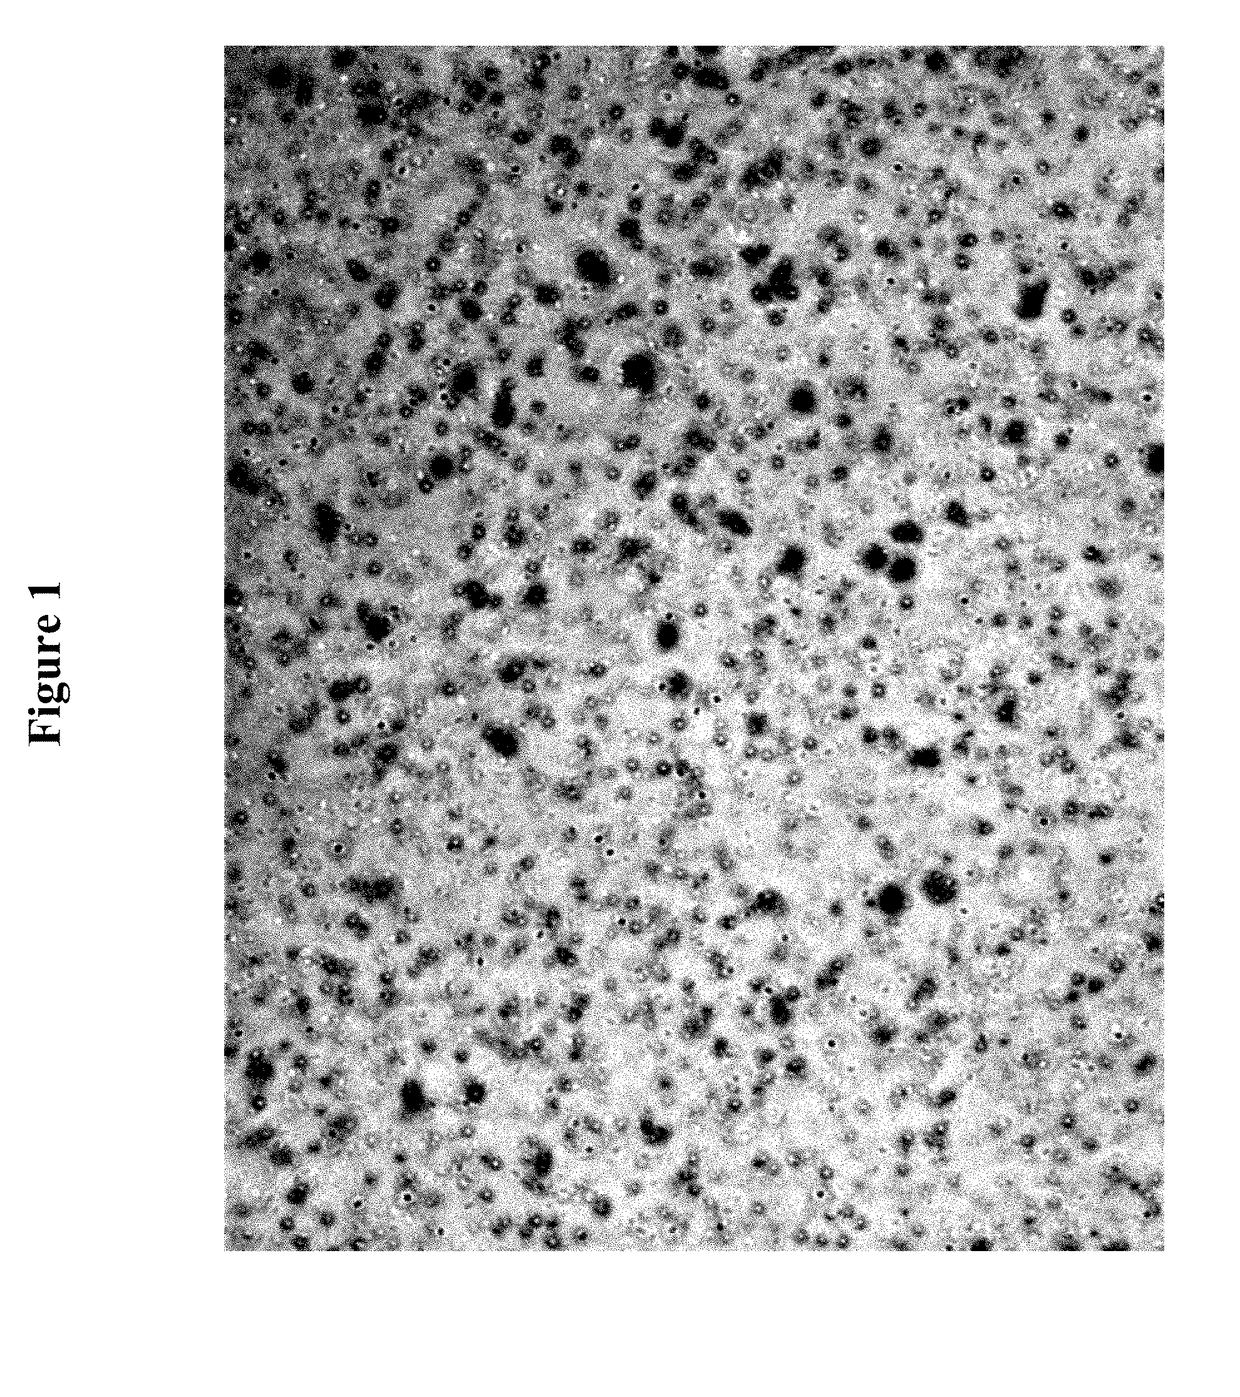 Polymeric topical antiseptic compound and method of use